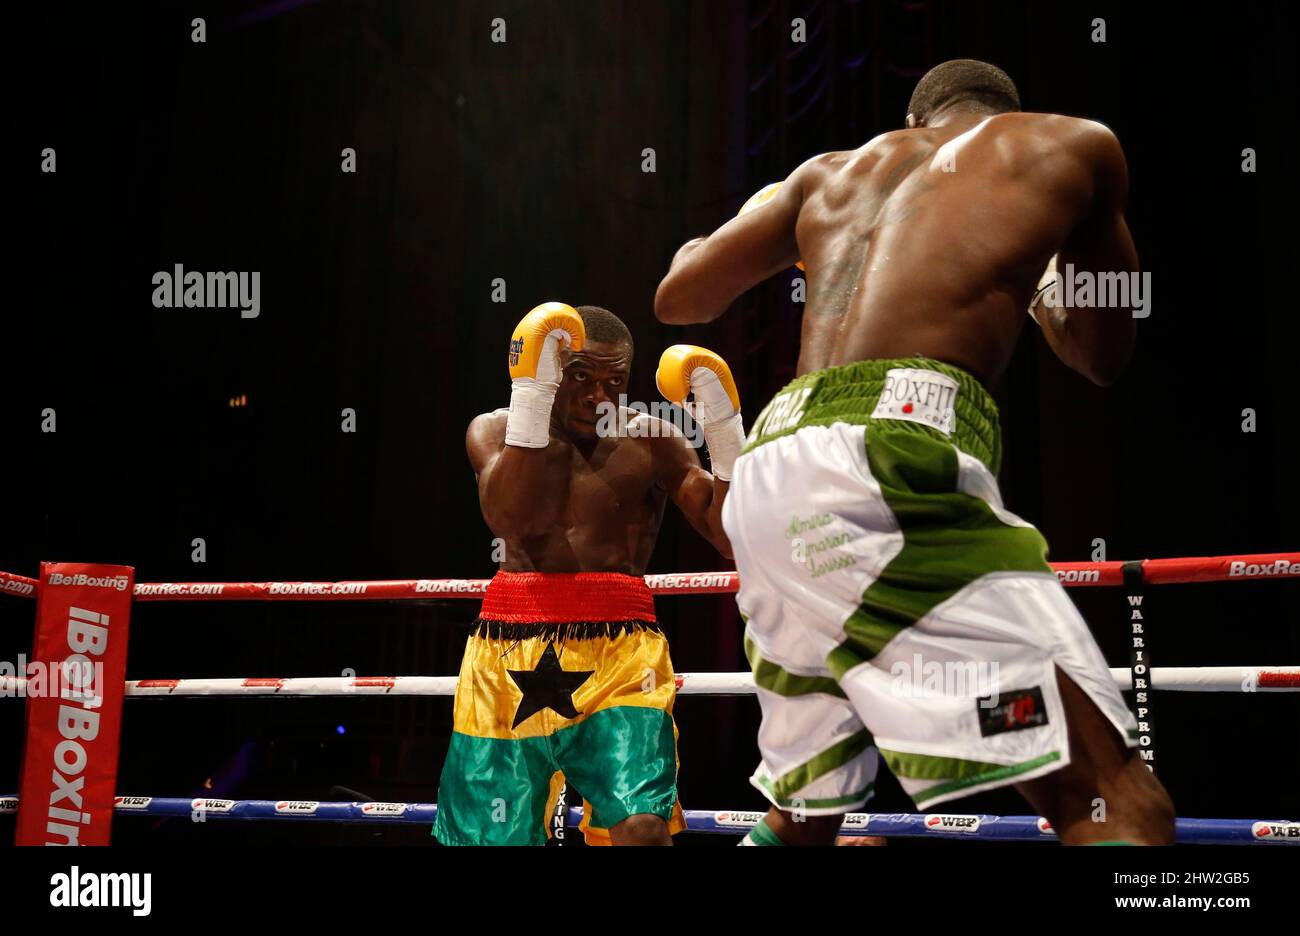 Joseph Lamptey fighting Larry Ekundayo (White Shorts) for the African Boxing Union (ABU) welterweight title during the 'Judgement Day' show at The Troxy, Limehouse, London. October 30, 2015. James Boardman / Telephoto Images +44 7967 642437 Stock Photo